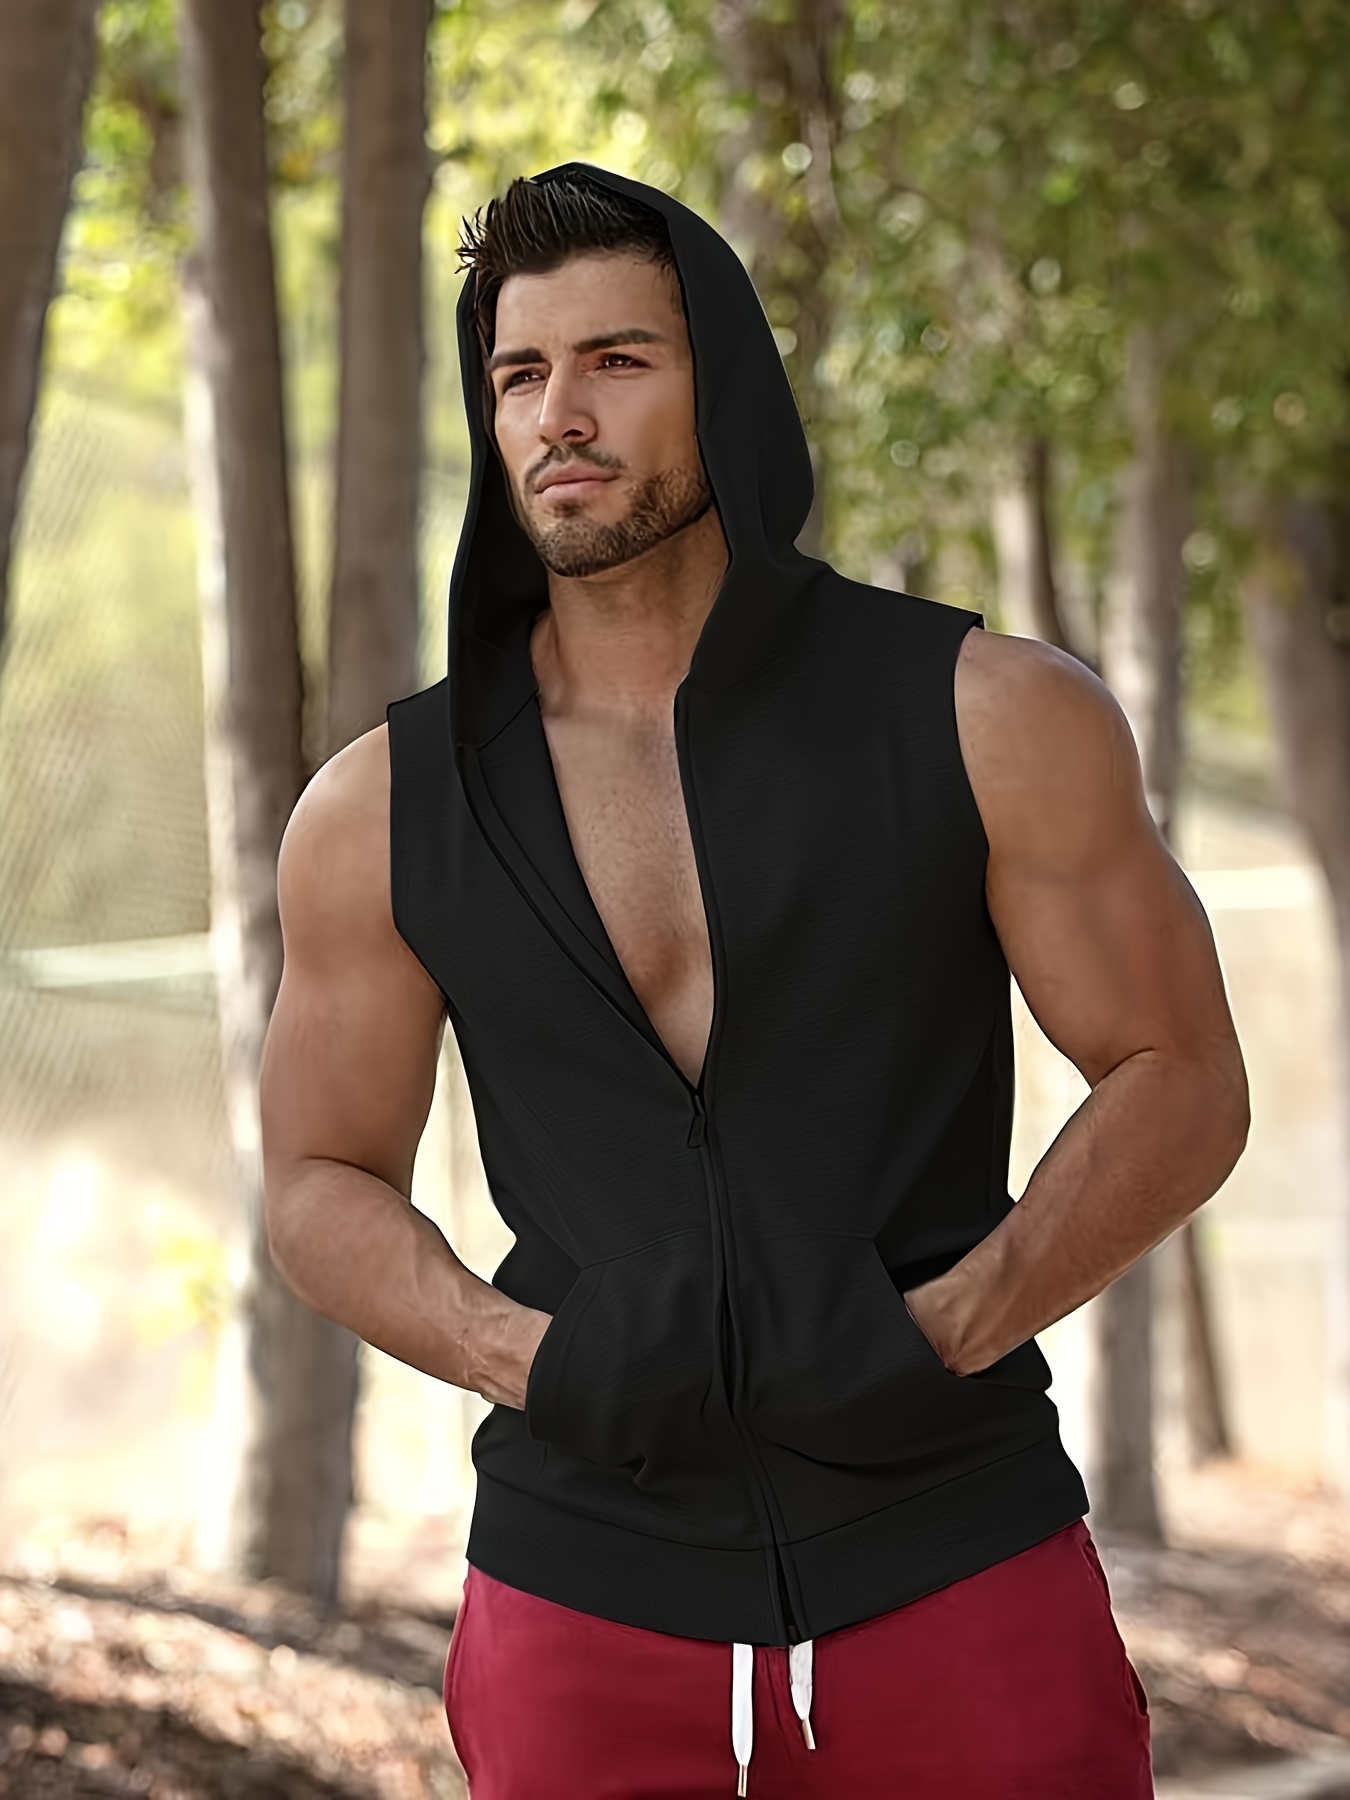  Men's Sleeveless Jacket and Long Pants Outfits Outdoor